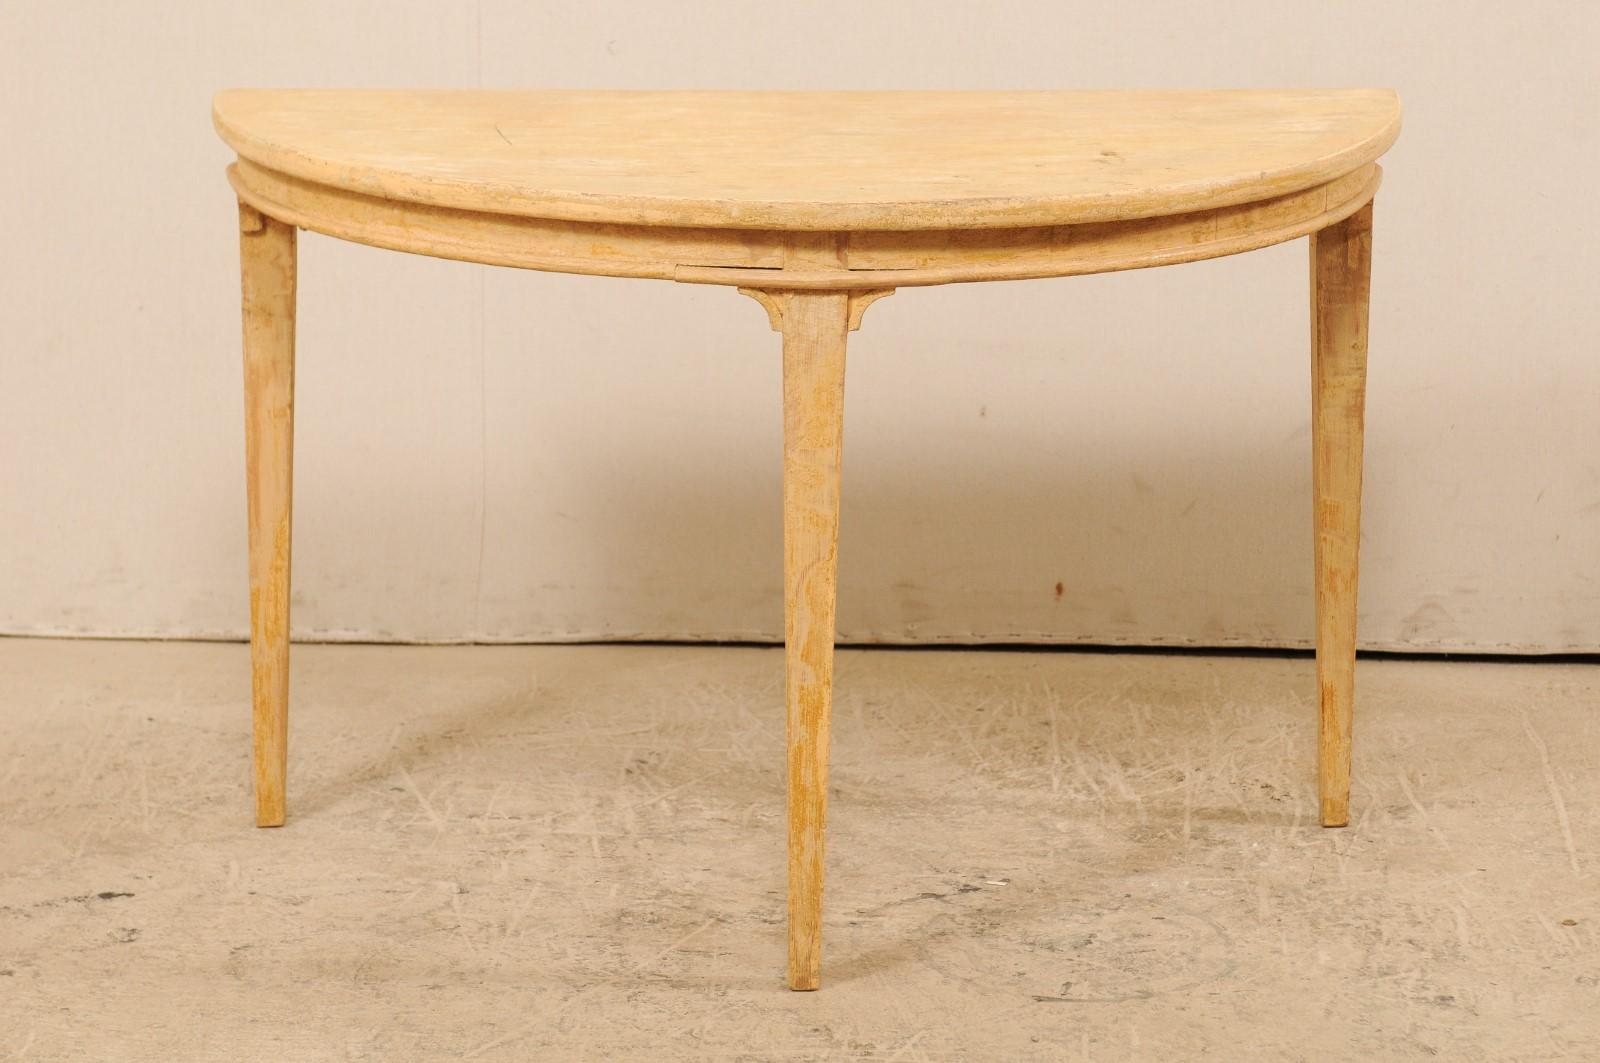 A single Swedish wooden demilune table from the 19th century. This antique table from Sweden features the typical half moon shaped top, over a rounded apron, and raised on squared and tapered legs. Small brackets are positioned where each leg top